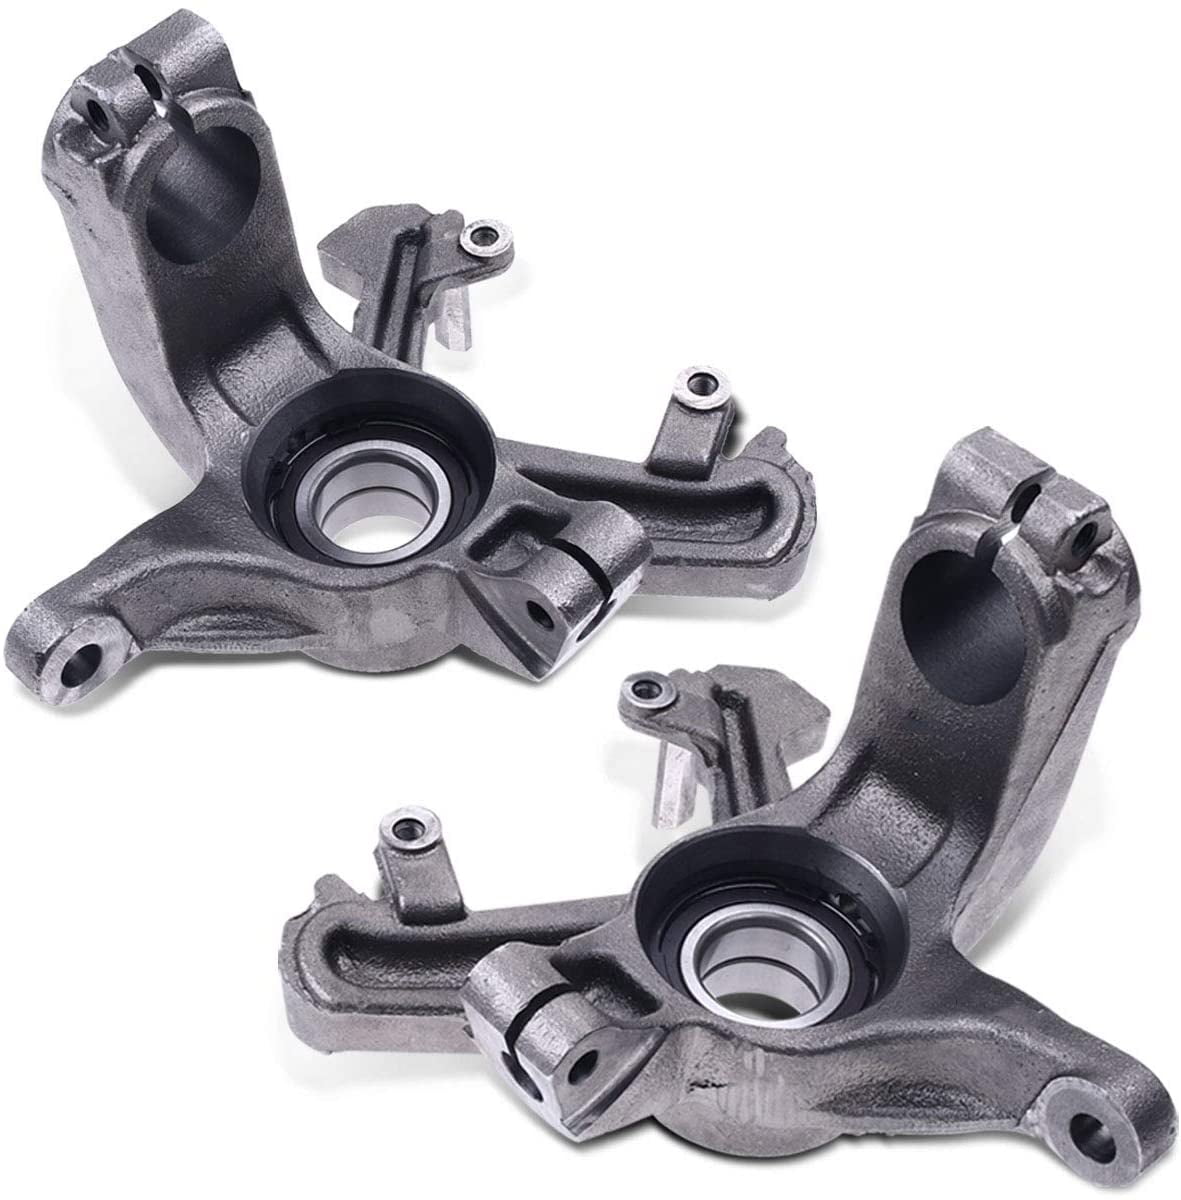 A-Premium Steering Knuckle Compatible with Ford Focus 2000-2004 Front Left Driver Side 